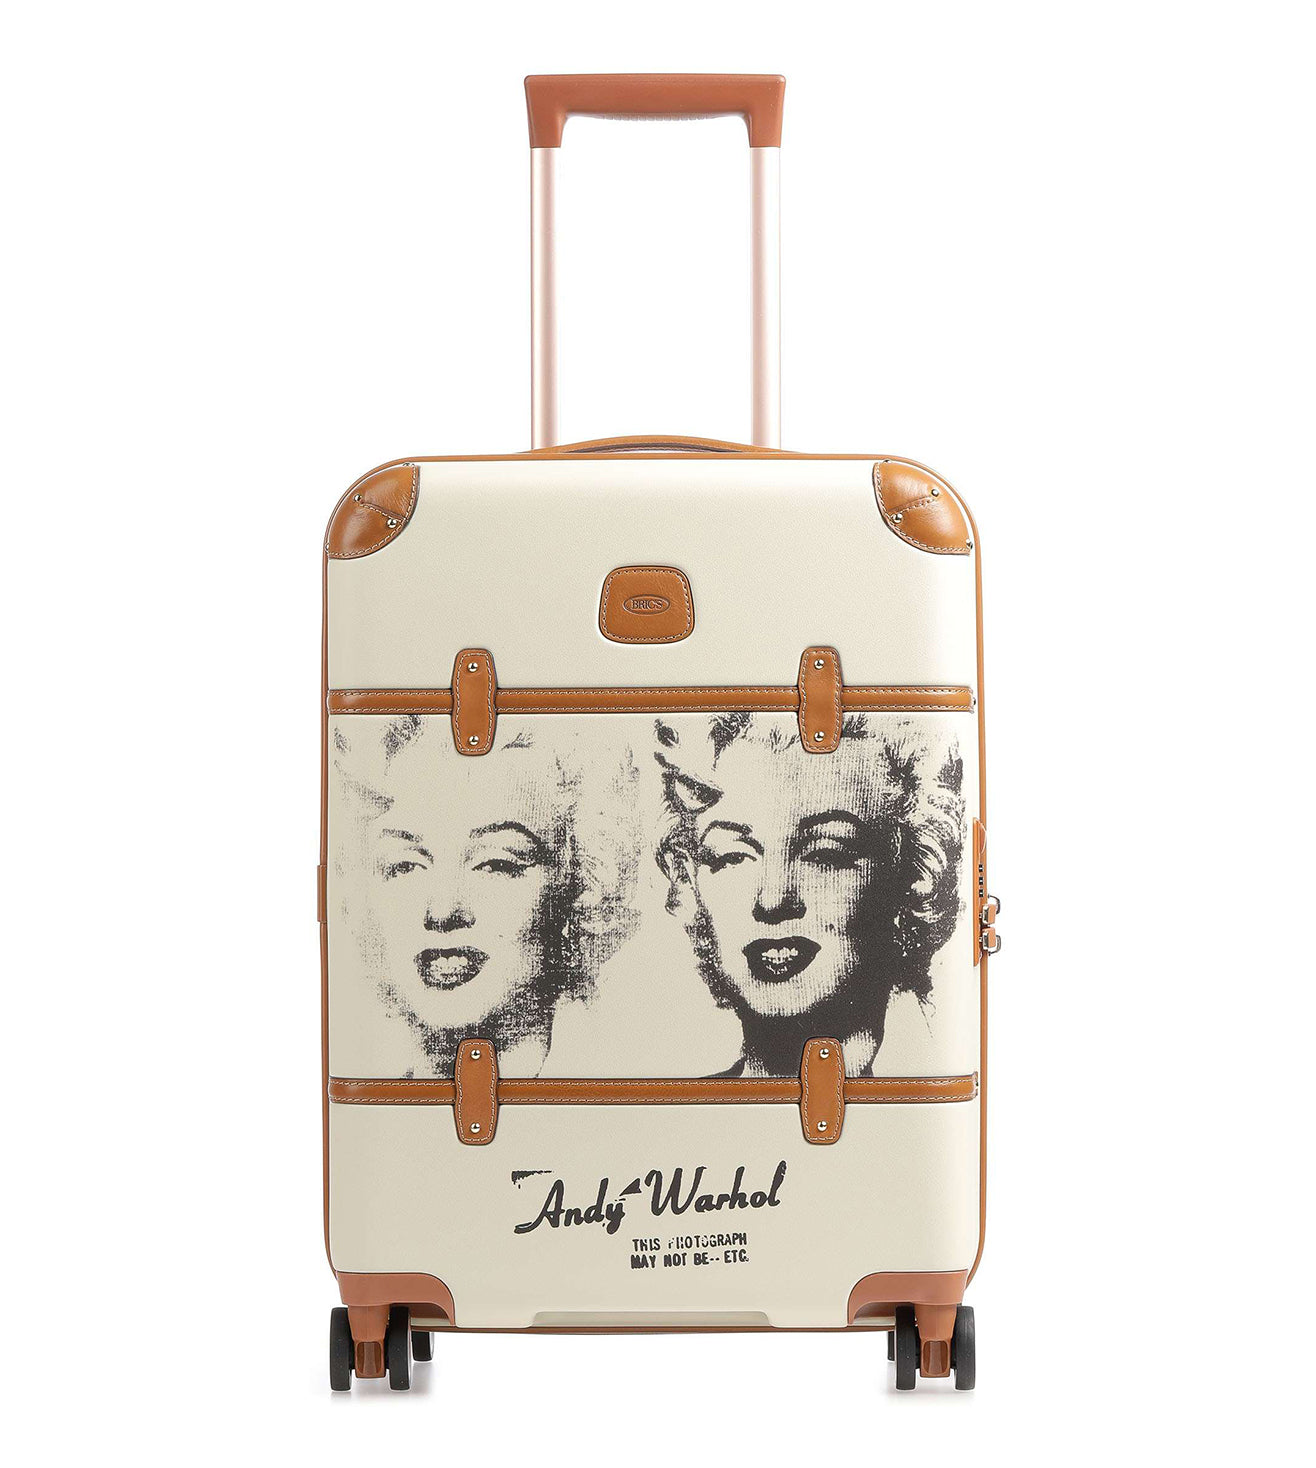 Bric's Andy Warhol Limited Edition Unisex Cabin Trolley